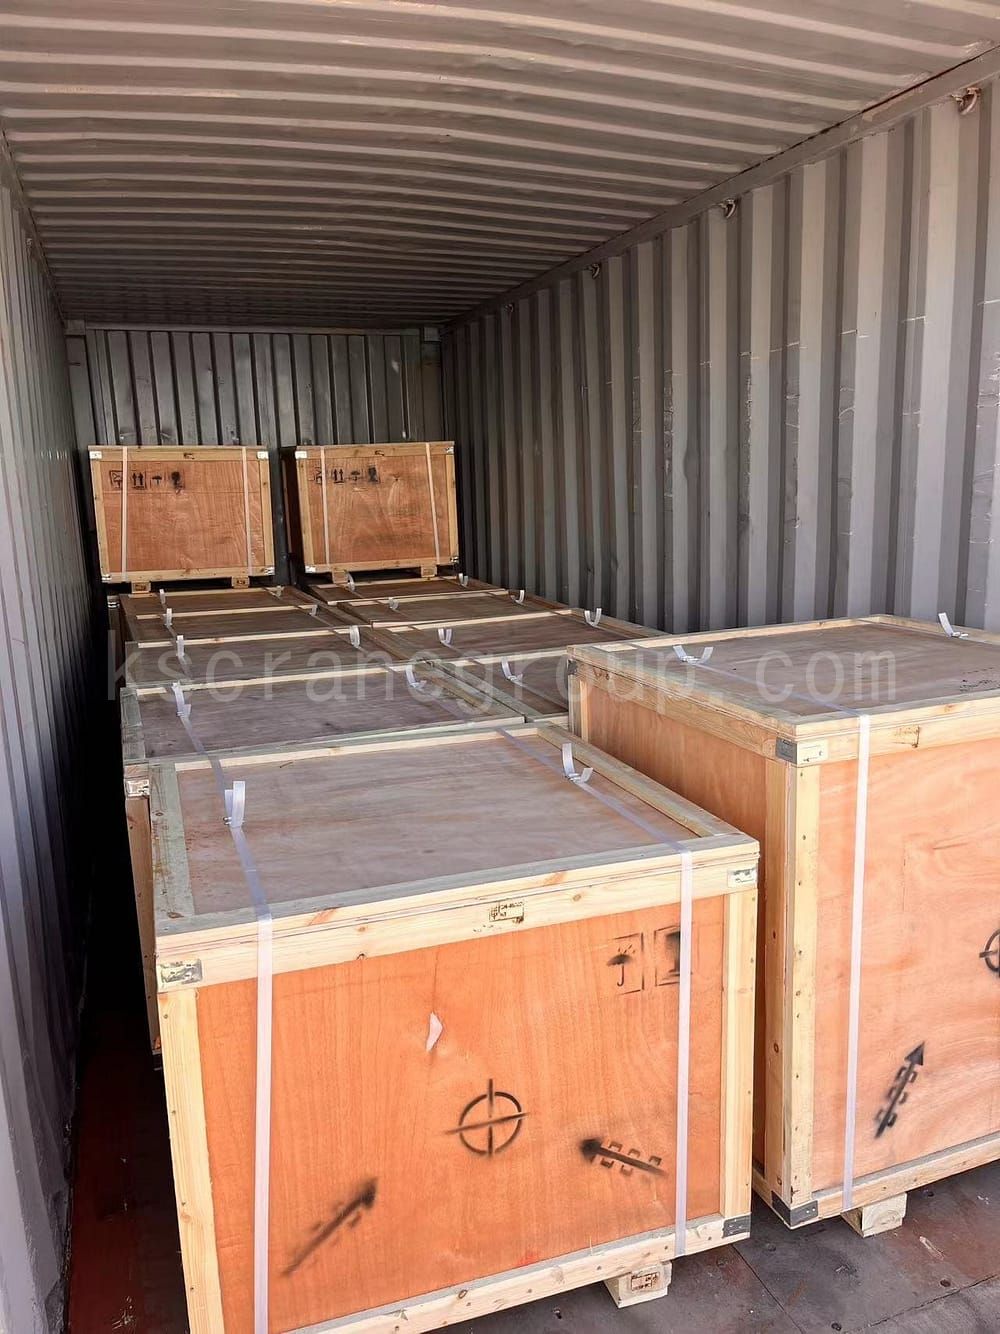 Pcs Casting Wheel Export to Egypt Package drawing